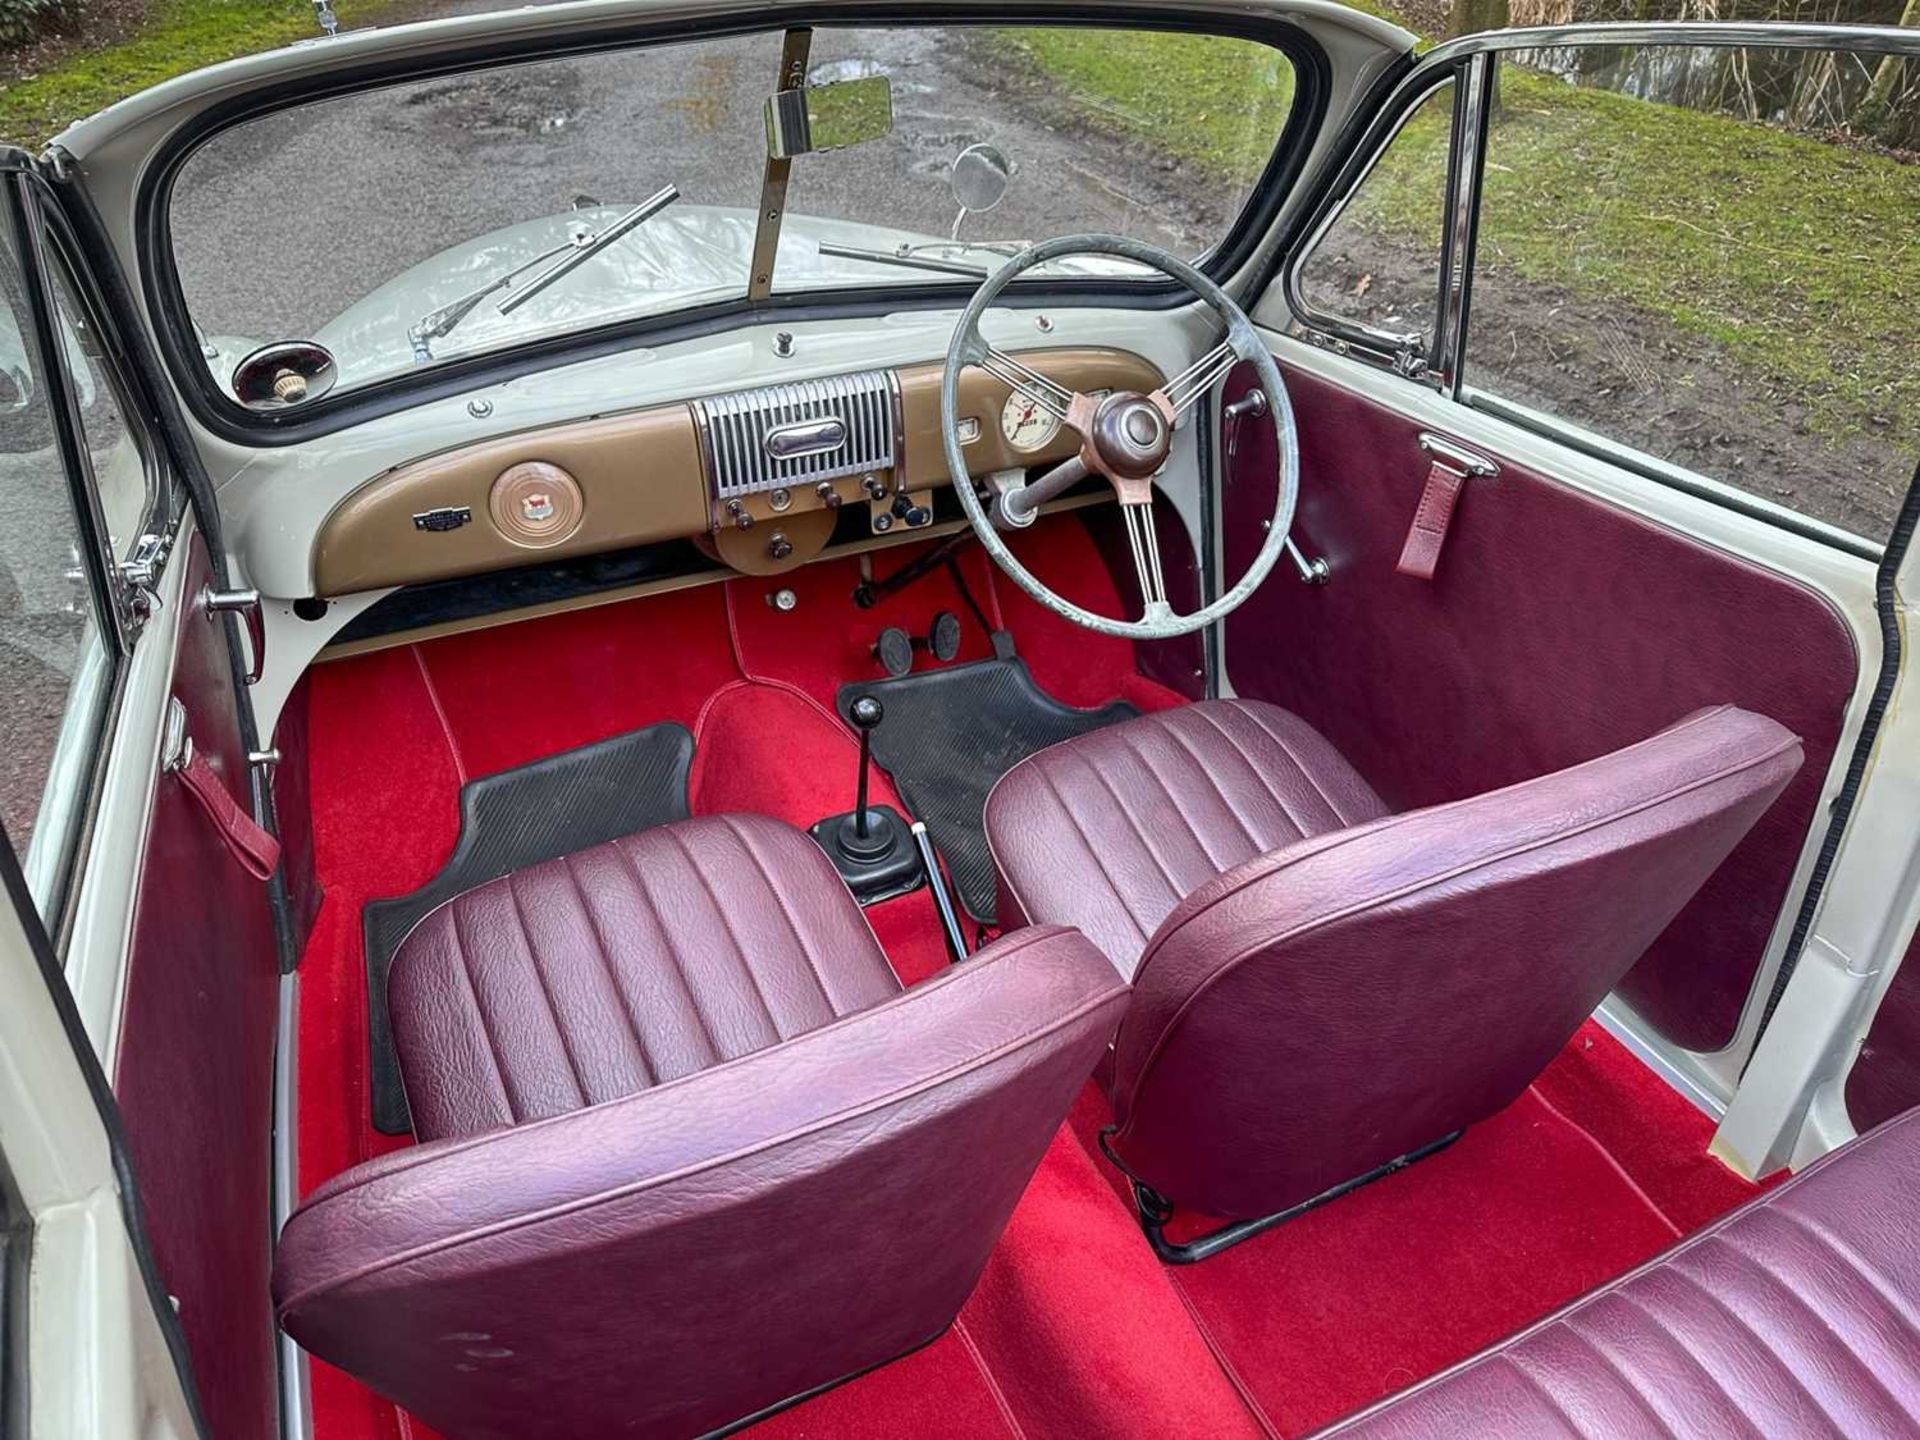 1954 Morris Minor Tourer Fully restored to concours standard - Image 51 of 100